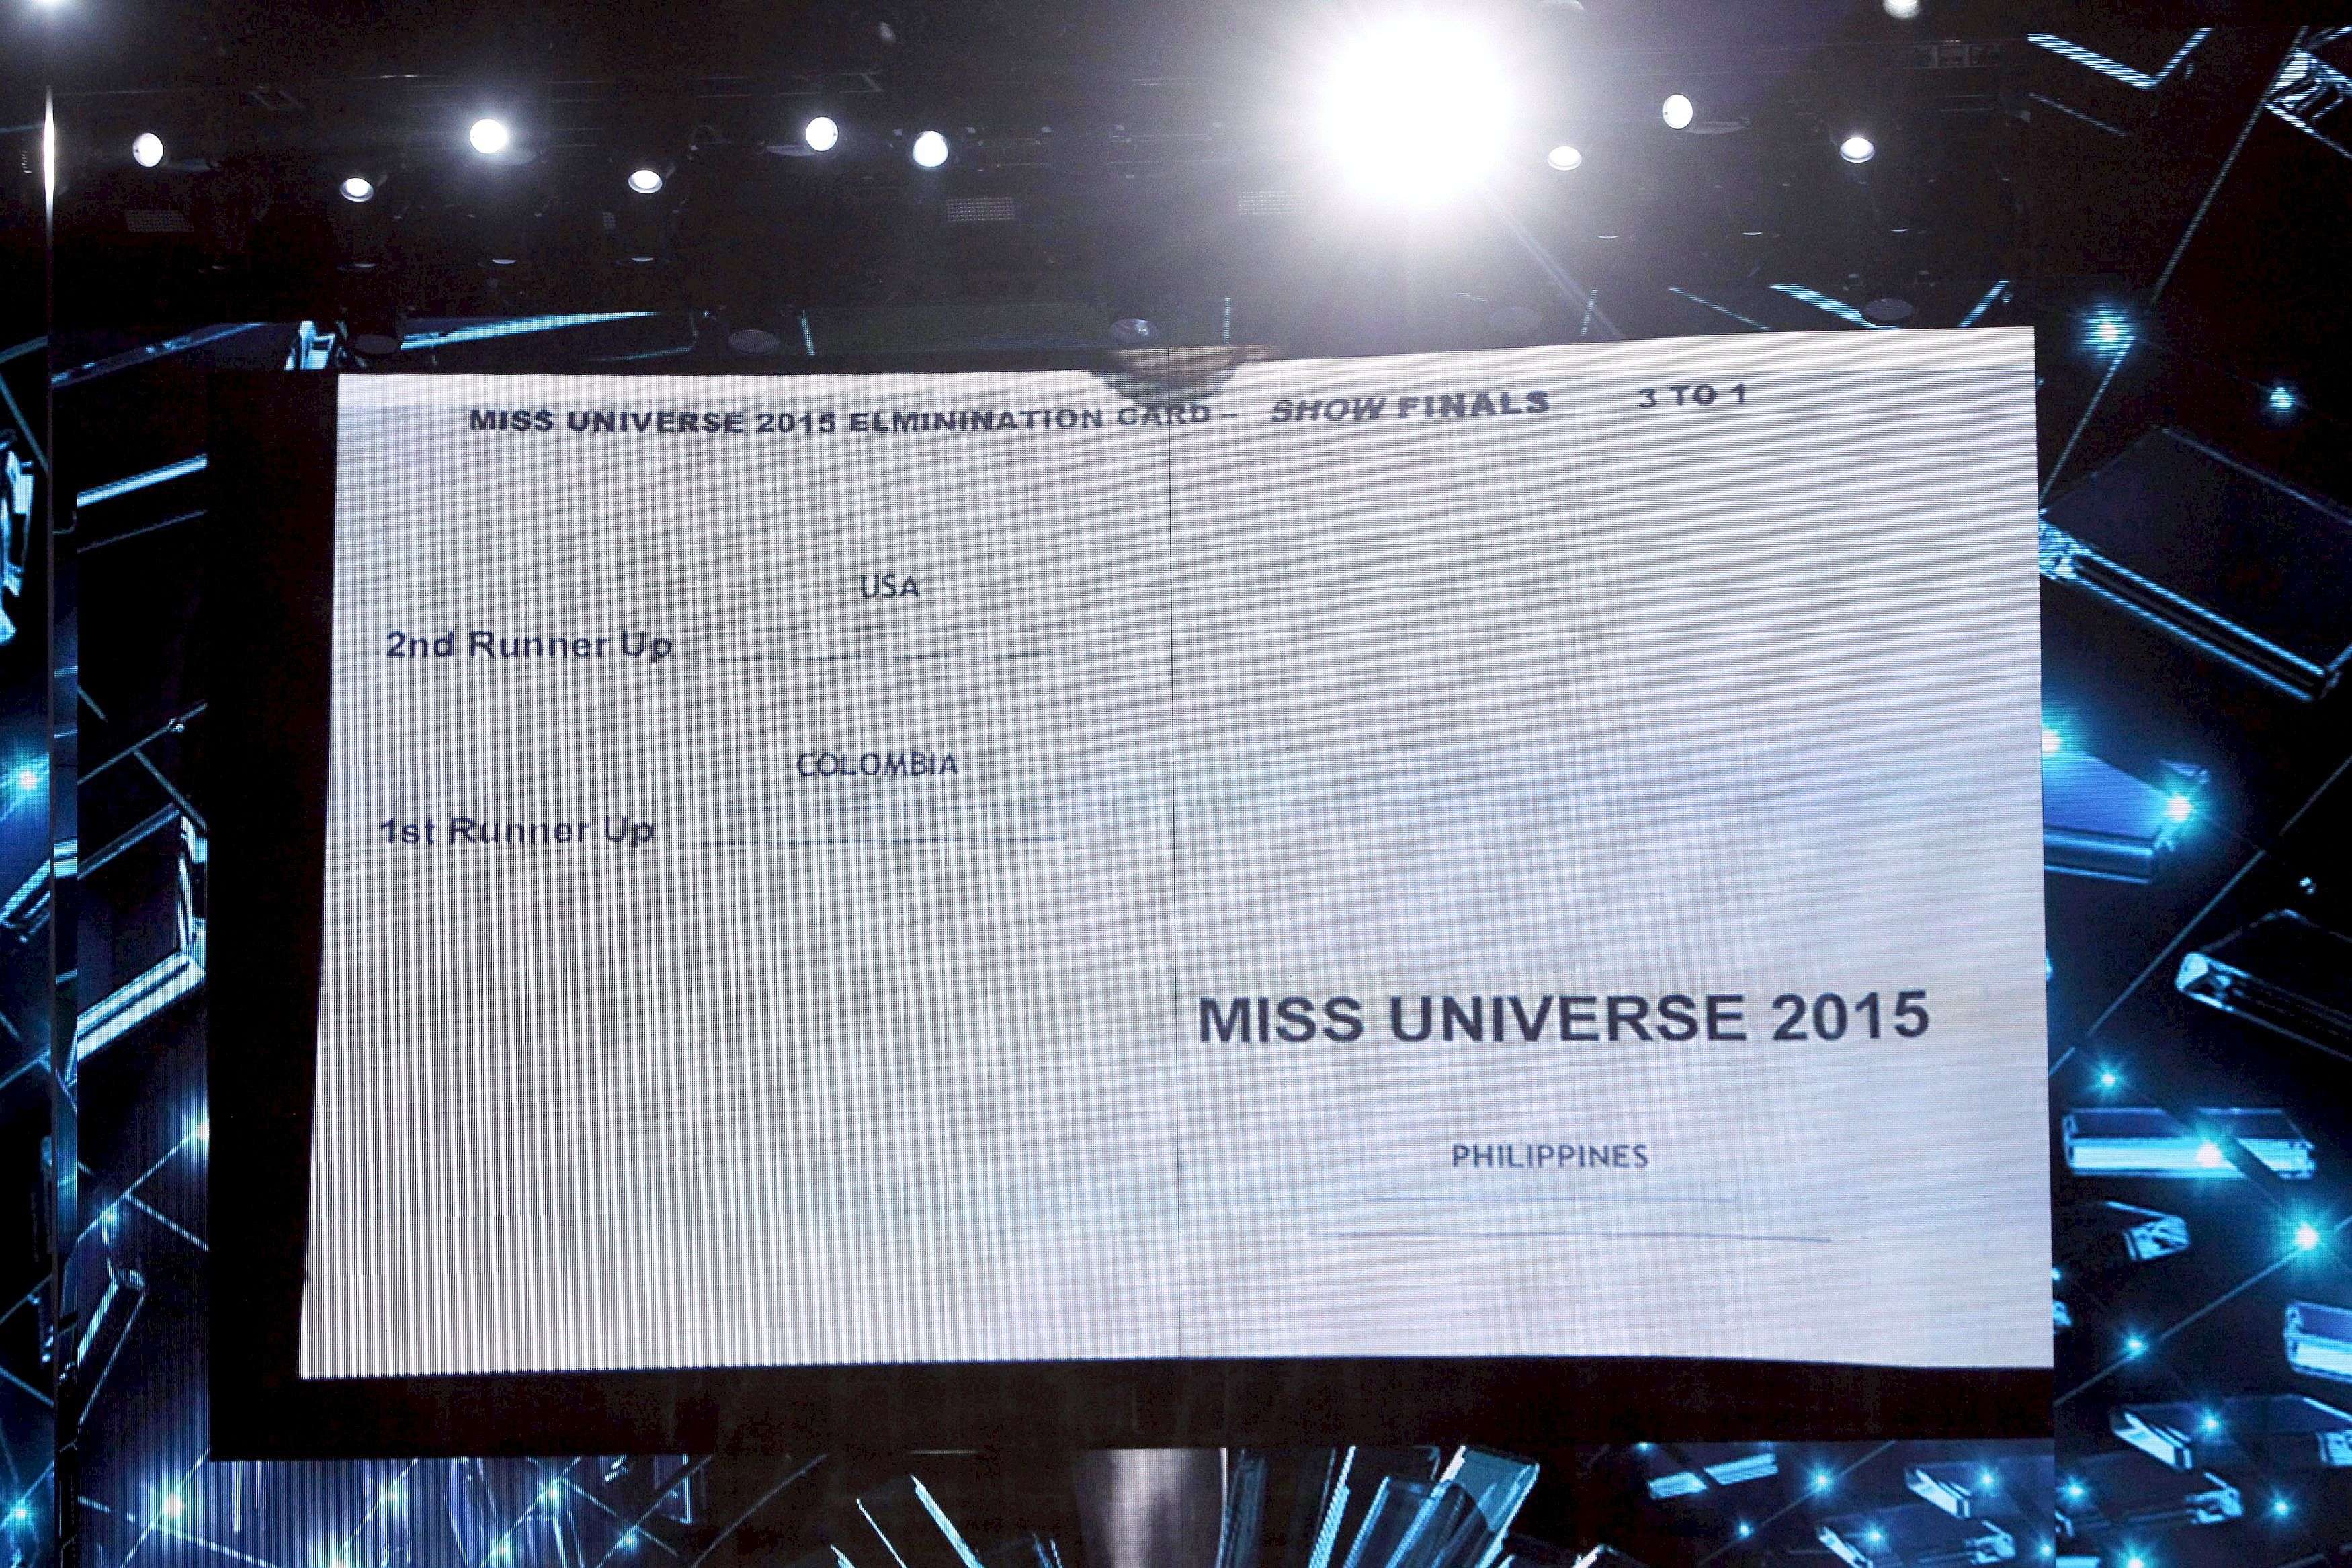 A card showing Miss Colombia Ariadna Gutierrez as first runner-up and Miss Philippines Pia Alonzo Wurtzbach as the winner is displayed on a video screen during the 2015 Miss Universe Pageant in Las Vegas, Nevada, December 20, 2015. Host Steve Harvey said he misread the card  in making the announcement that Miss Colombia was the winner. REUTERS/Steve Marcus    ATTENTION EDITORS - FOR EDITORIAL USE ONLY. NOT FOR SALE FOR MARKETING OR ADVERTISING CAMPAIGNS